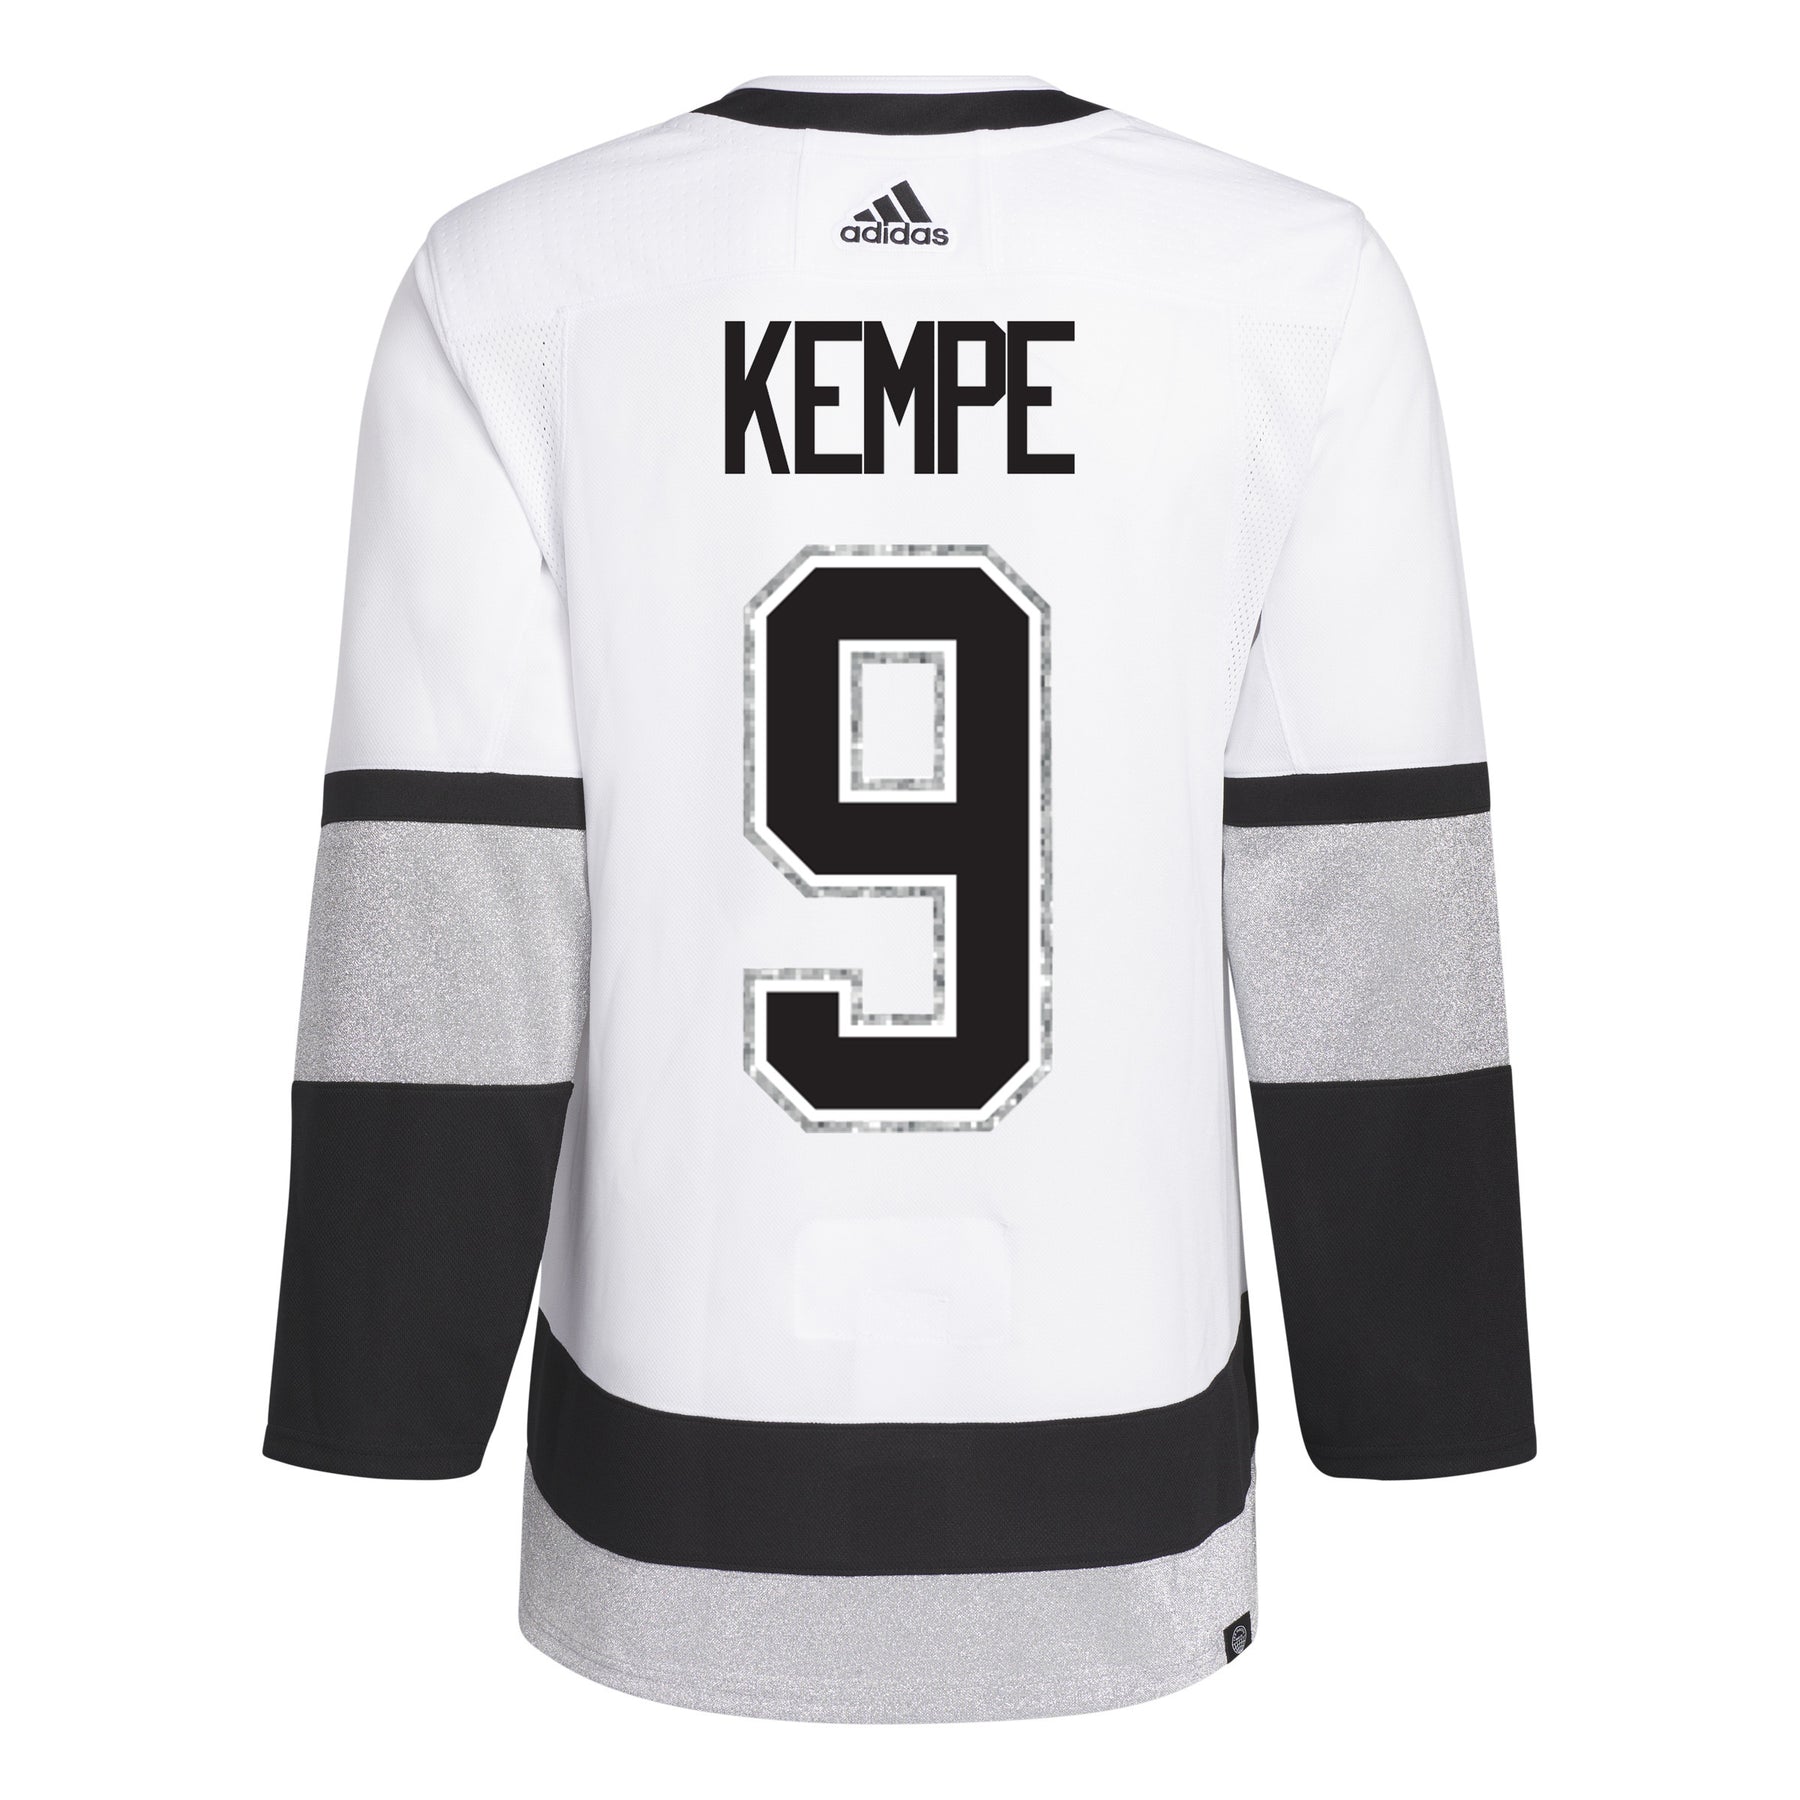 adidas NHL Hockey Los Angeles Kings Men's Jersey - Size 50 for sale online